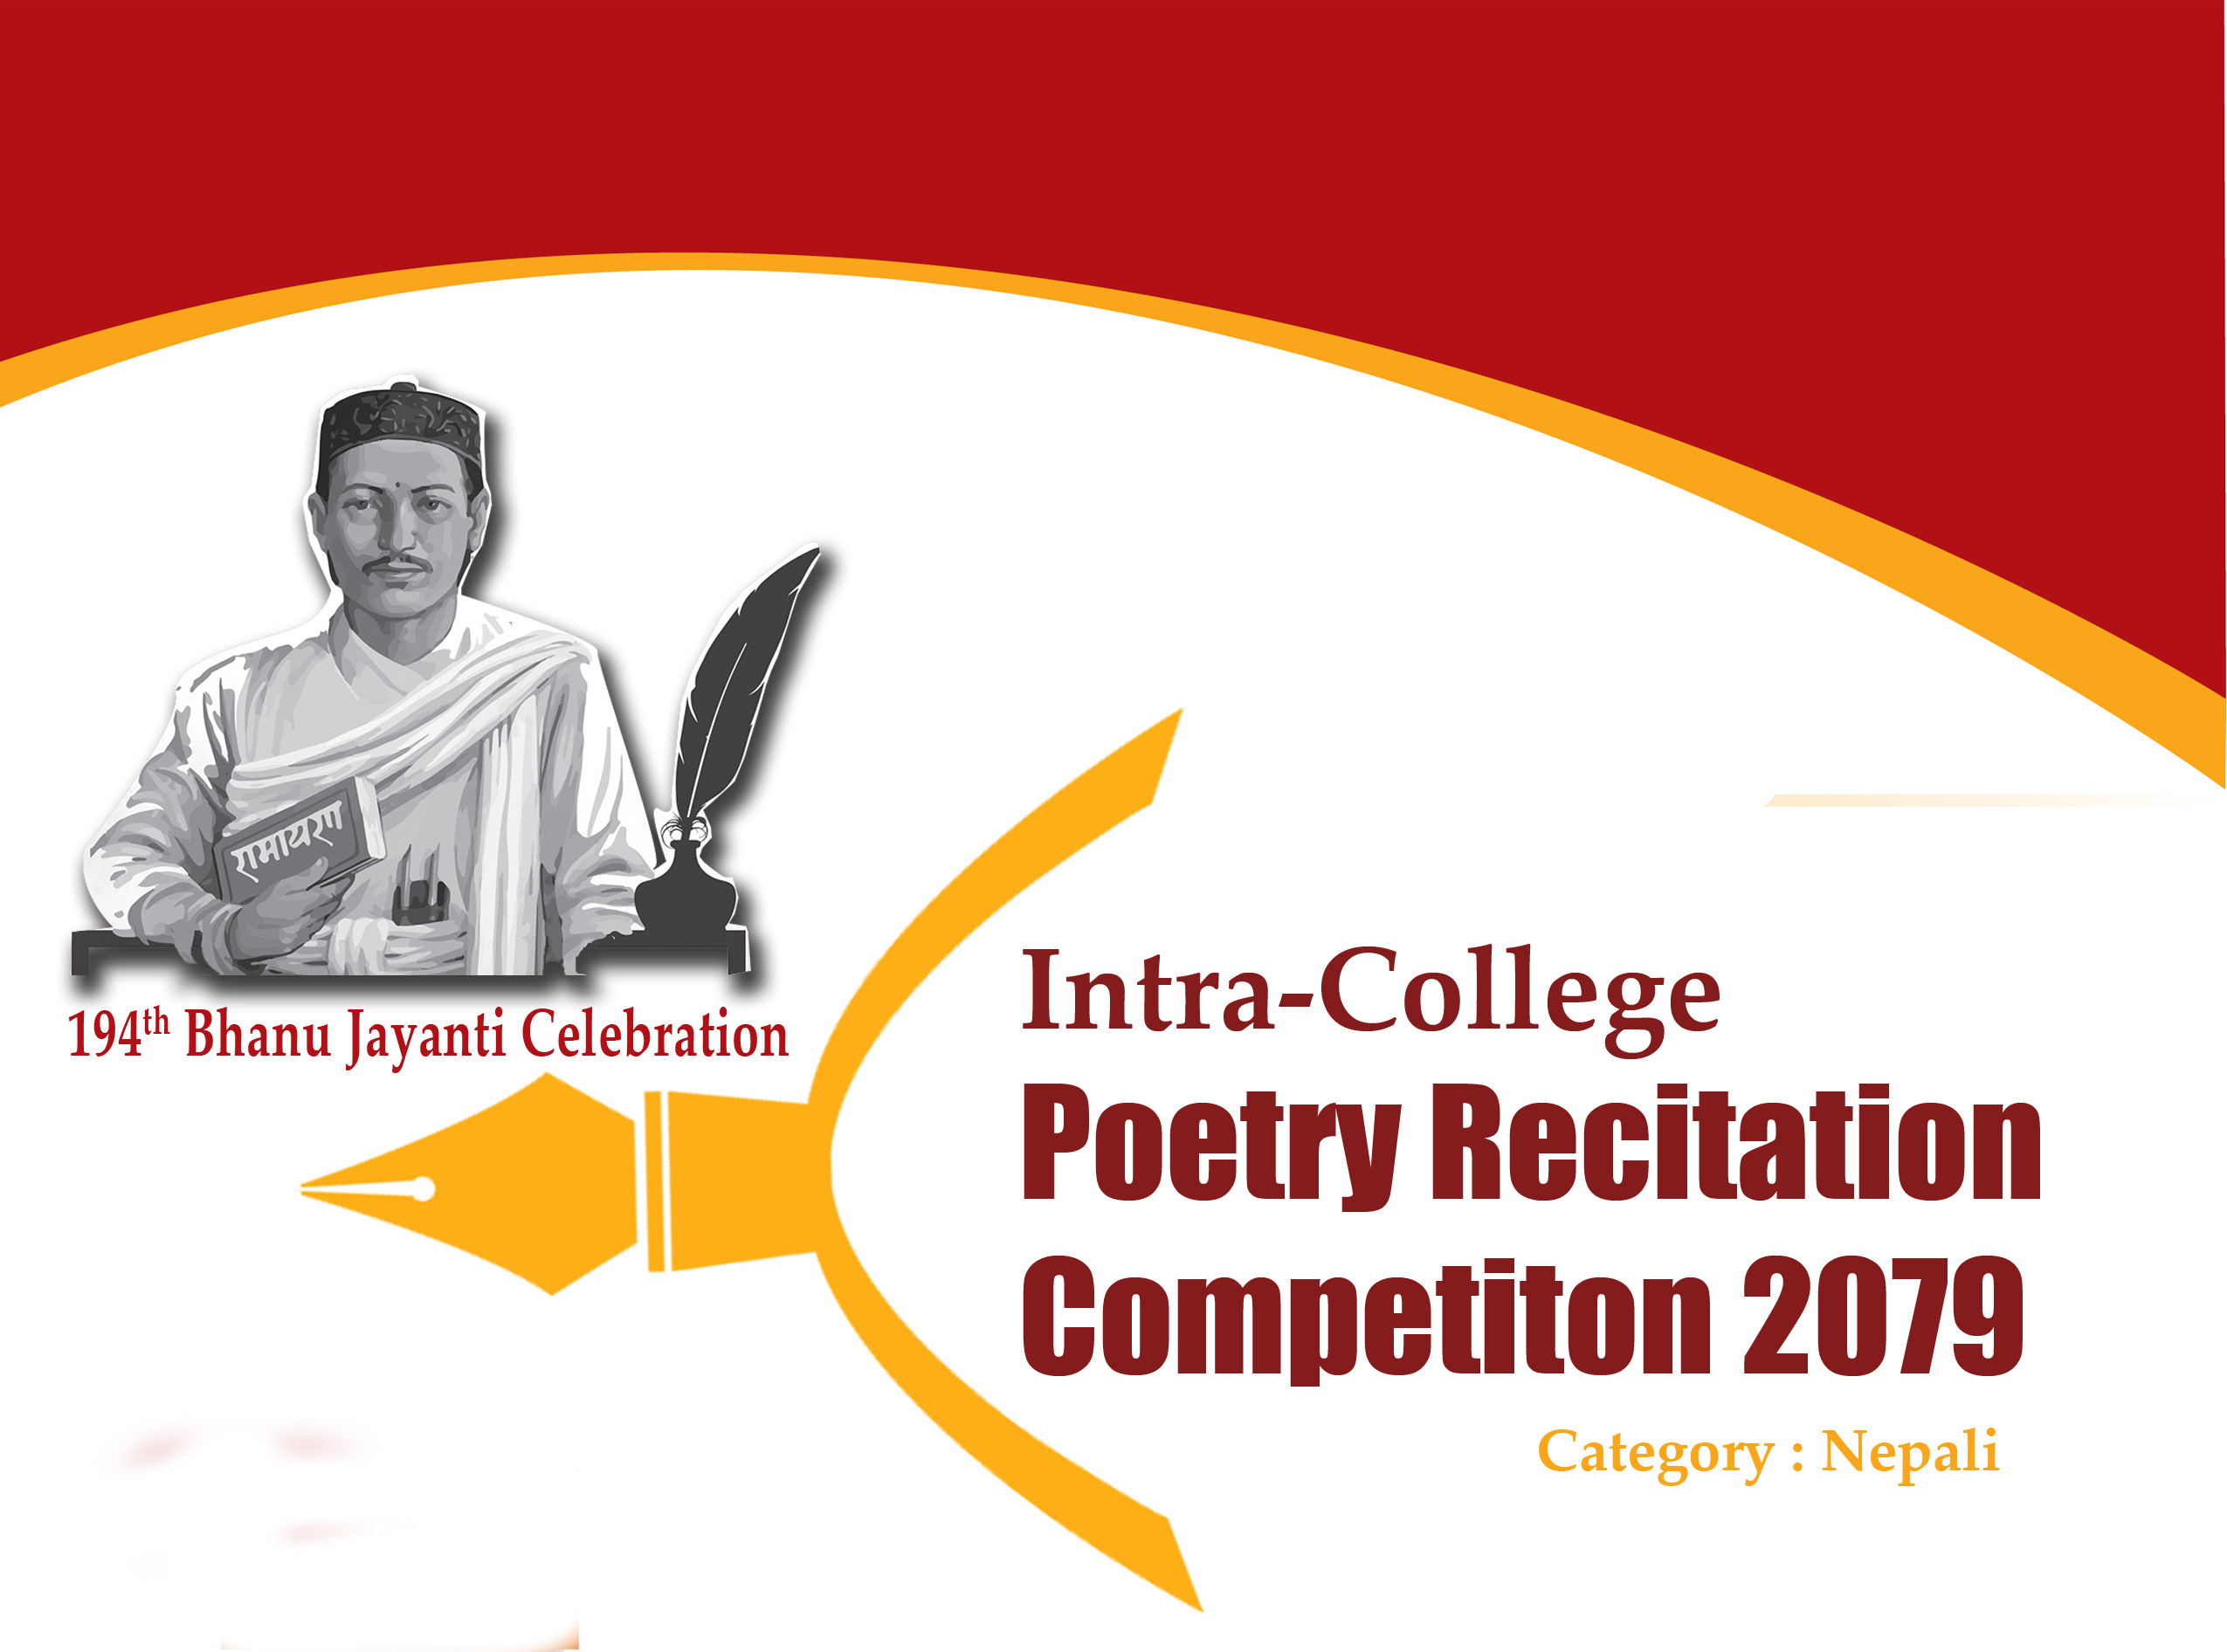 Intra-College Poetry Recitation Competition 2079